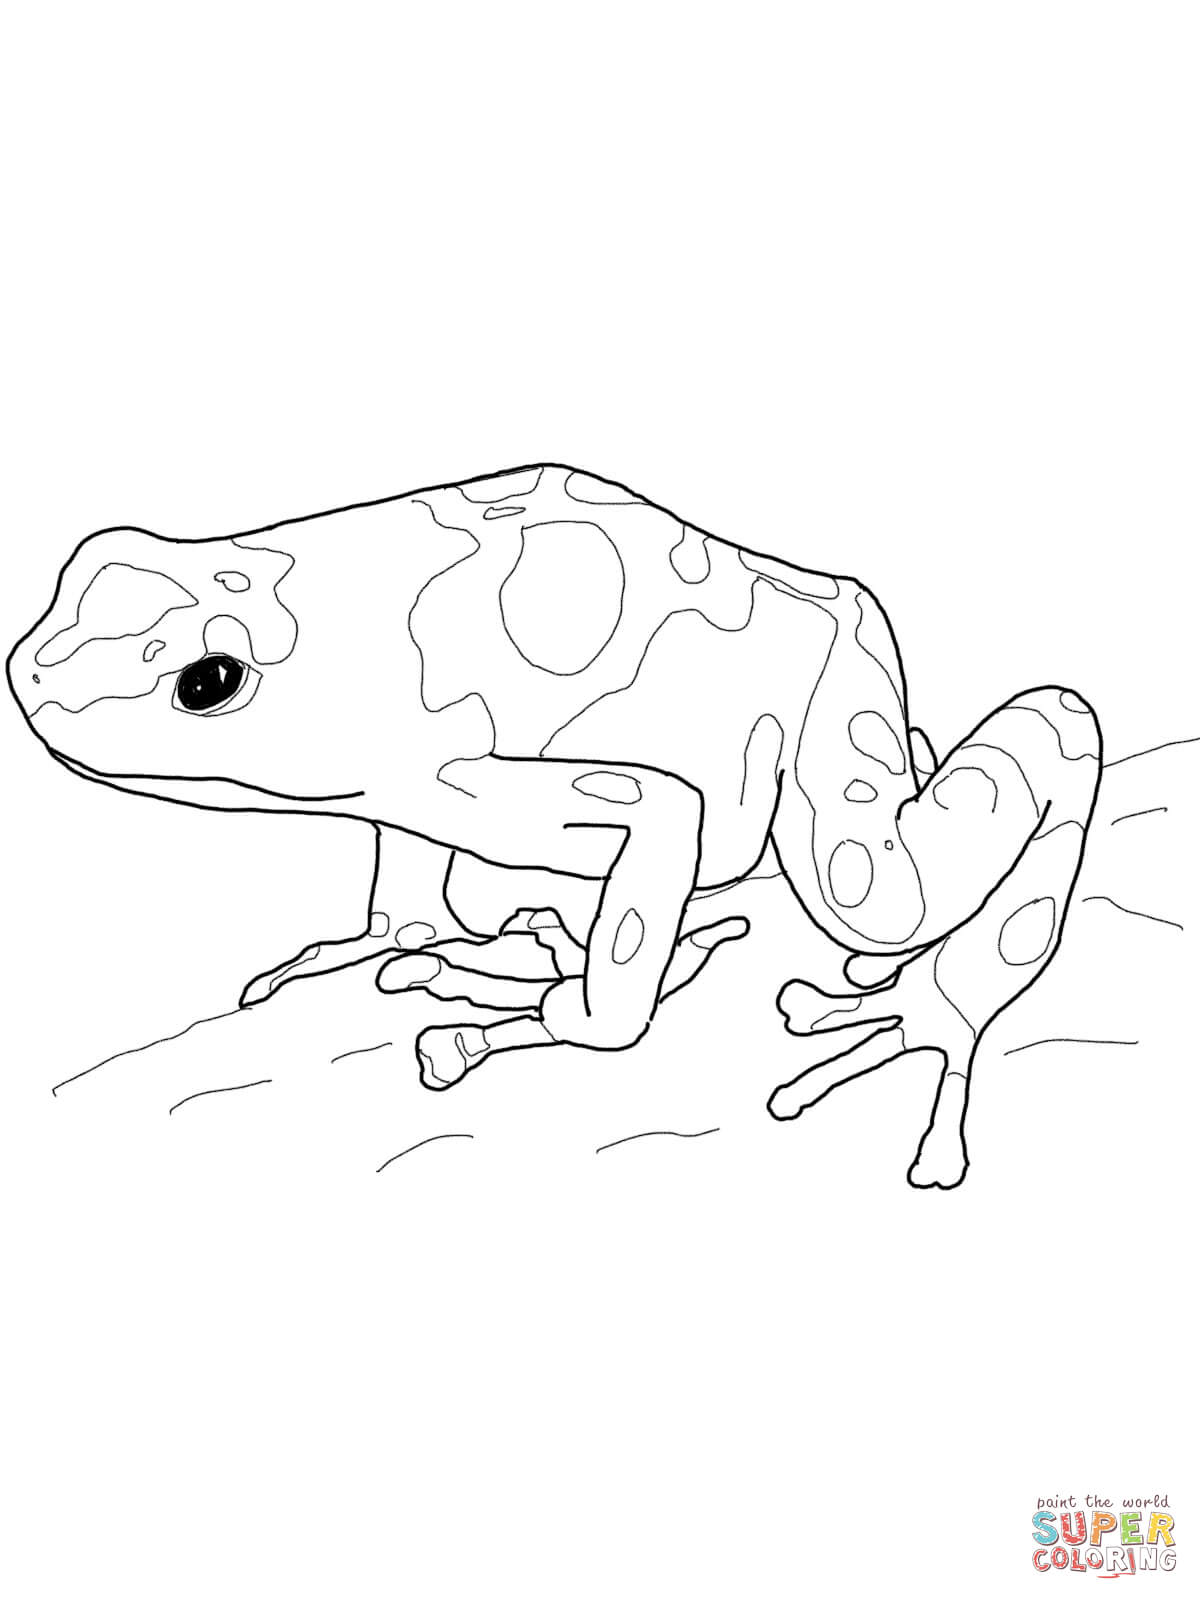 Blue Poison Dart Frog coloring #6, Download drawings